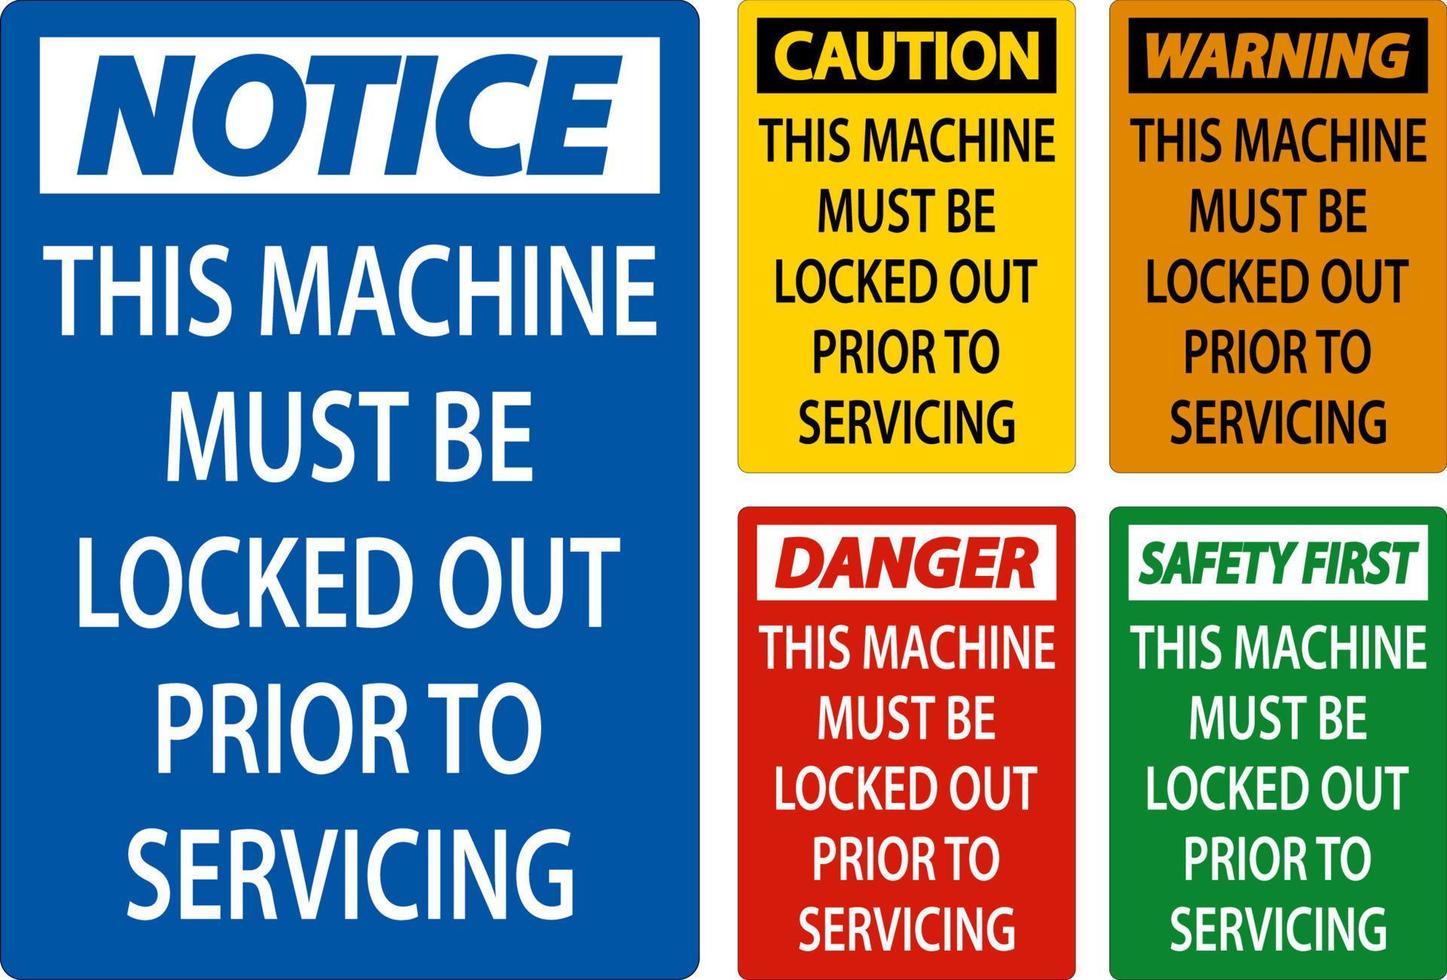 Caution This Machine Must Be Locked Out Prior To Servicing Sign vector